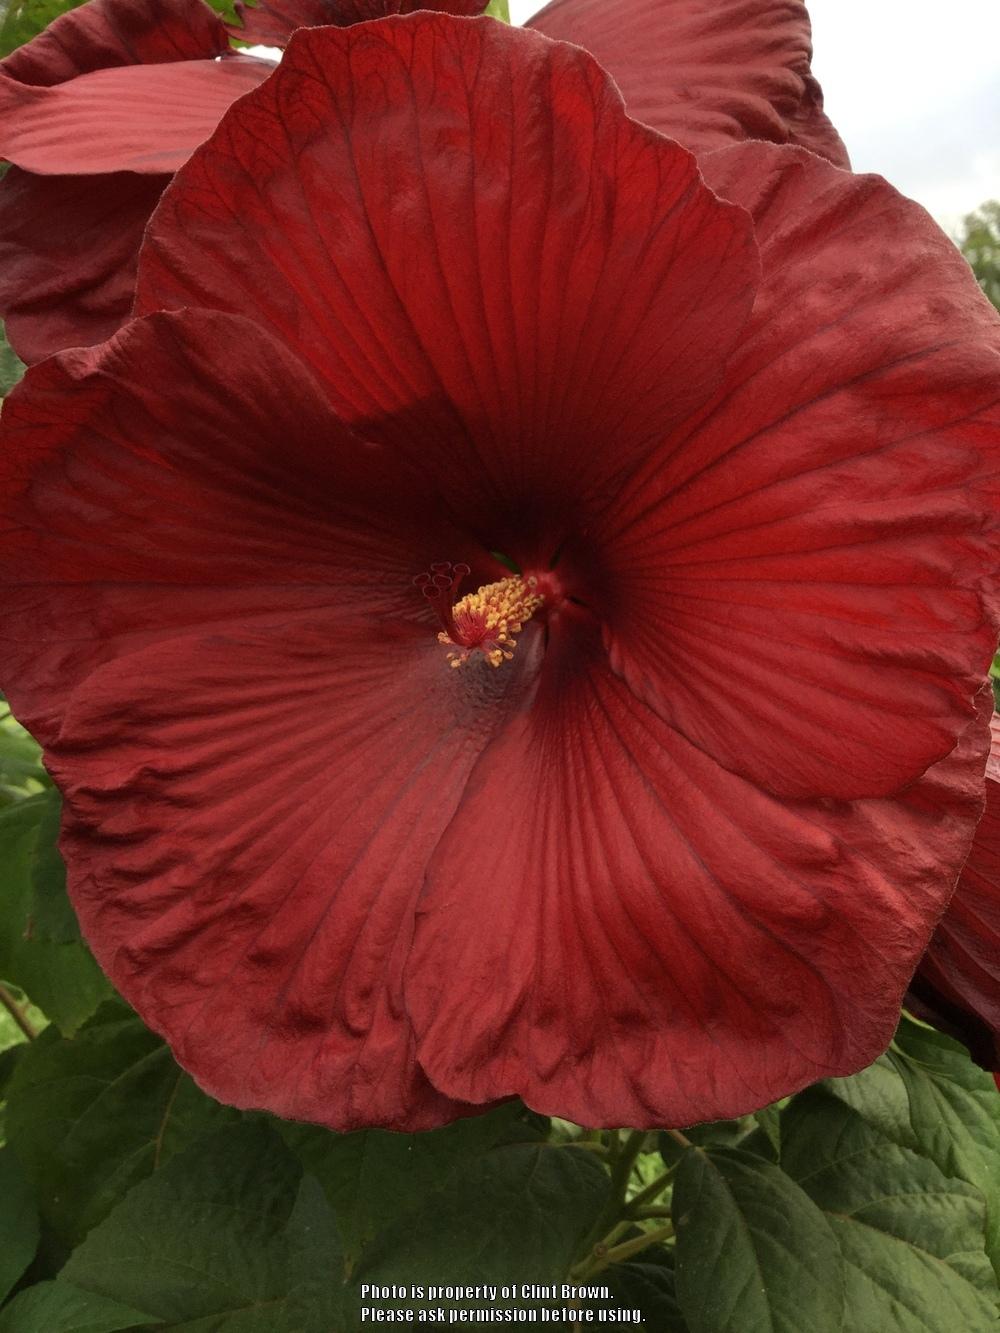 Photo of Hybrid Hardy Hibiscus (Hibiscus 'Heartthrob') uploaded by clintbrown